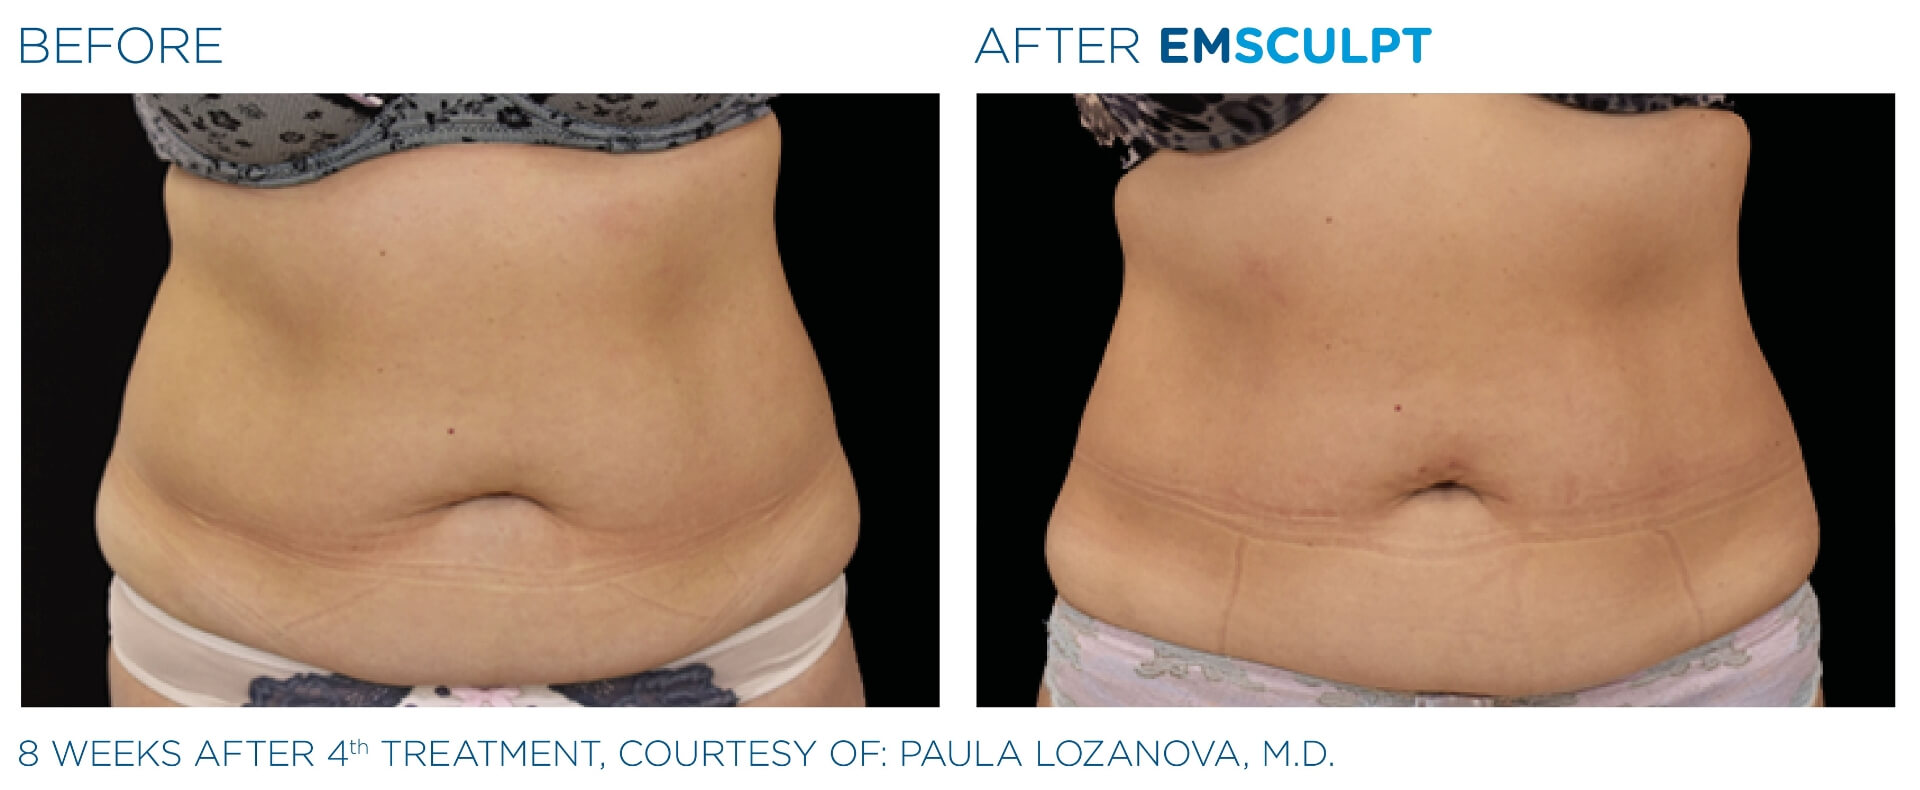 four-seasons-obgyn-emsculpt-before-and-after-4